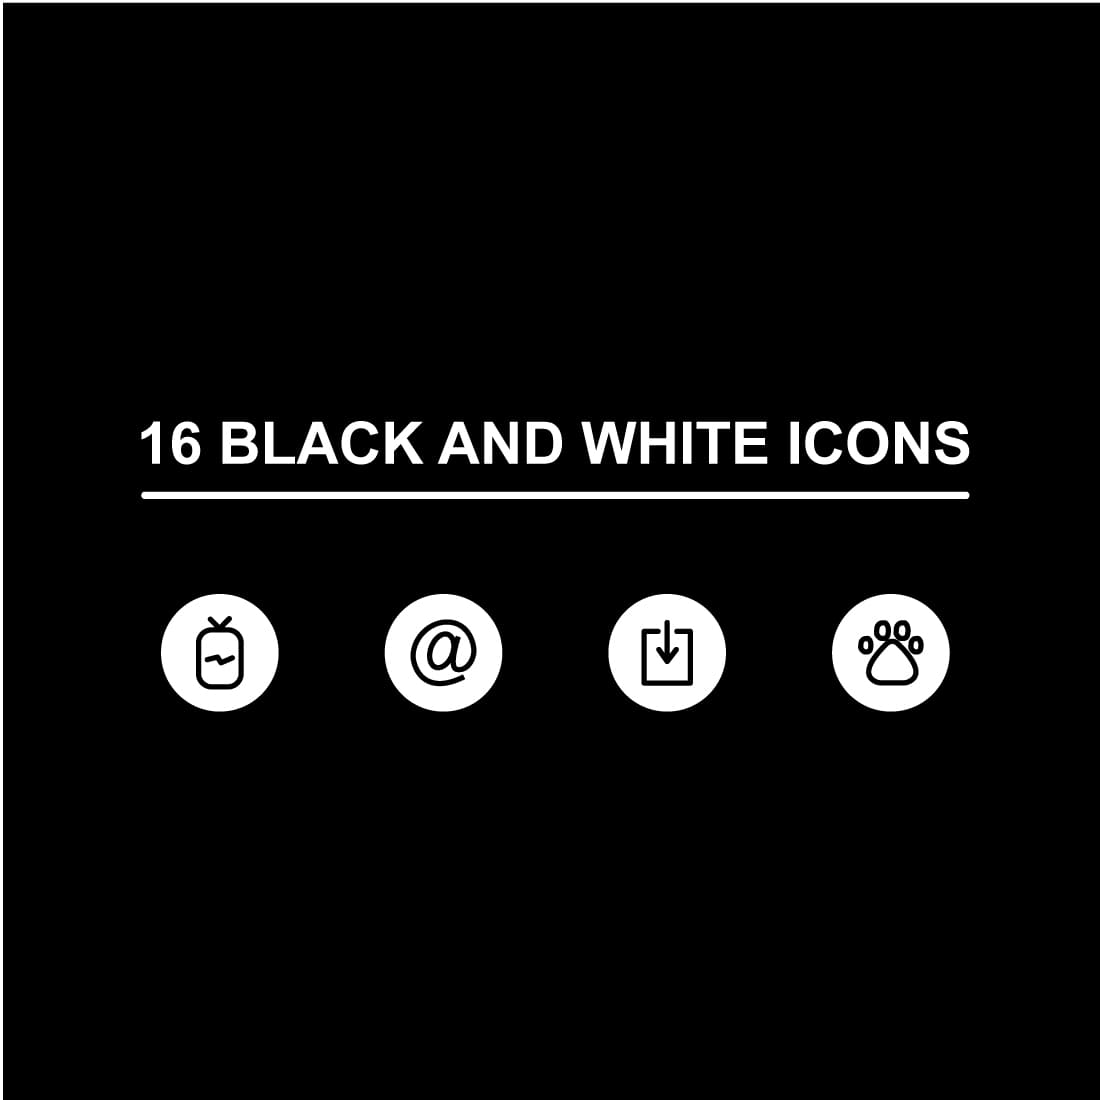 1100 2 Black And White App Icons.